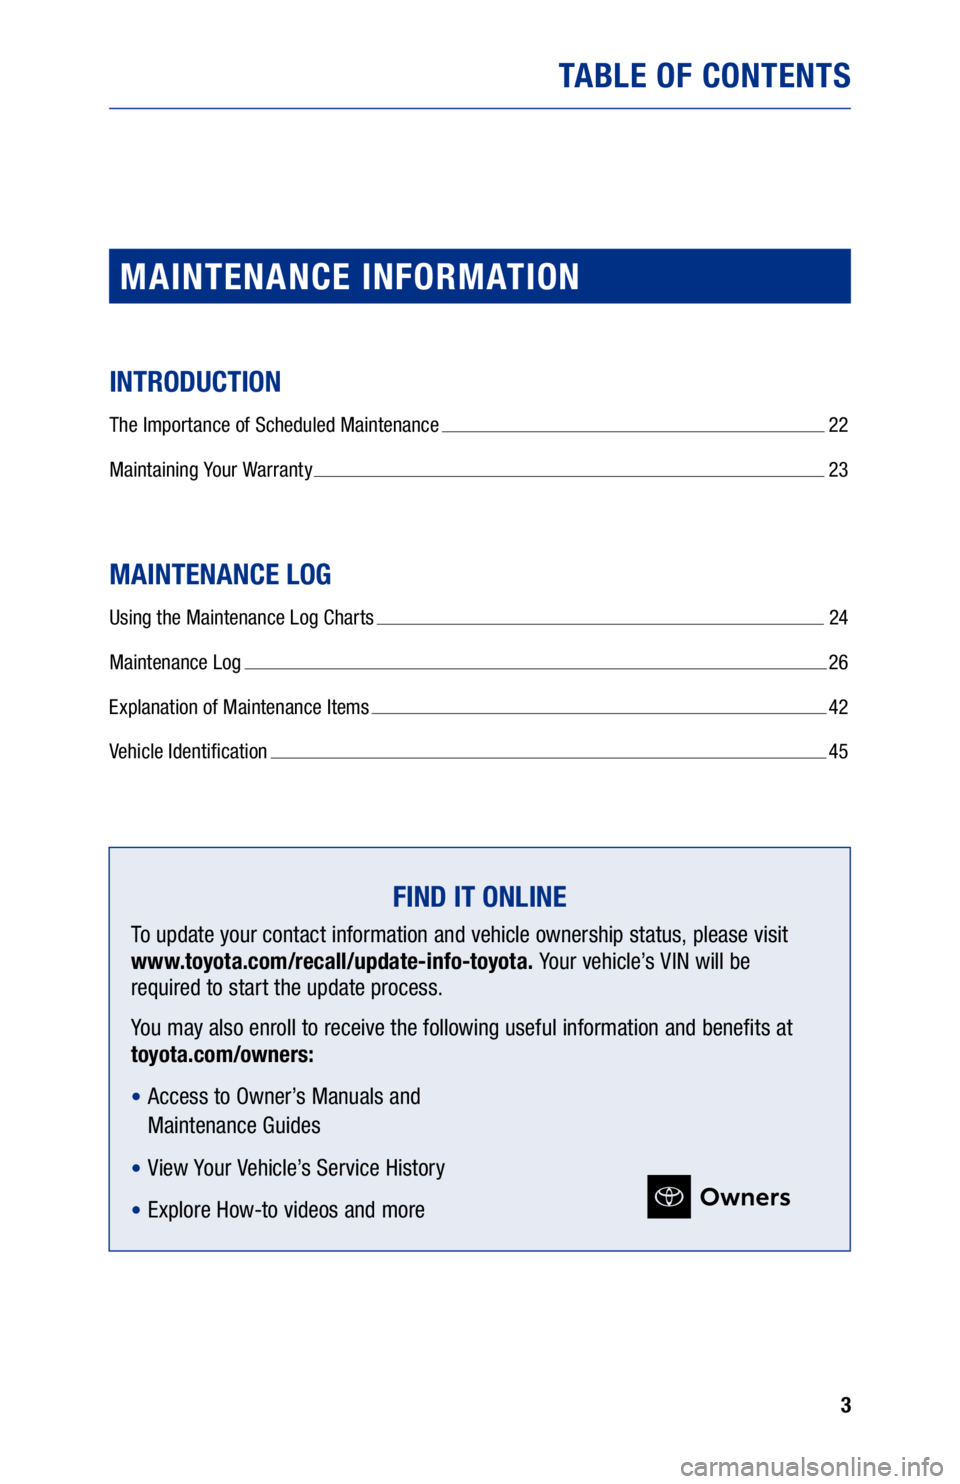 TOYOTA MIRAI 2021  Warranties & Maintenance Guides (in English) 3
TABLE OF CONTENTS
MAINTENANCE INFORMATION
INTRODUCTION
The Importance of Scheduled Maintenance  22
M
aintaining Your Warranty 
 23
MAINTENANCE LOG
Using the Maintenance Log Charts  24
M
aintenance L